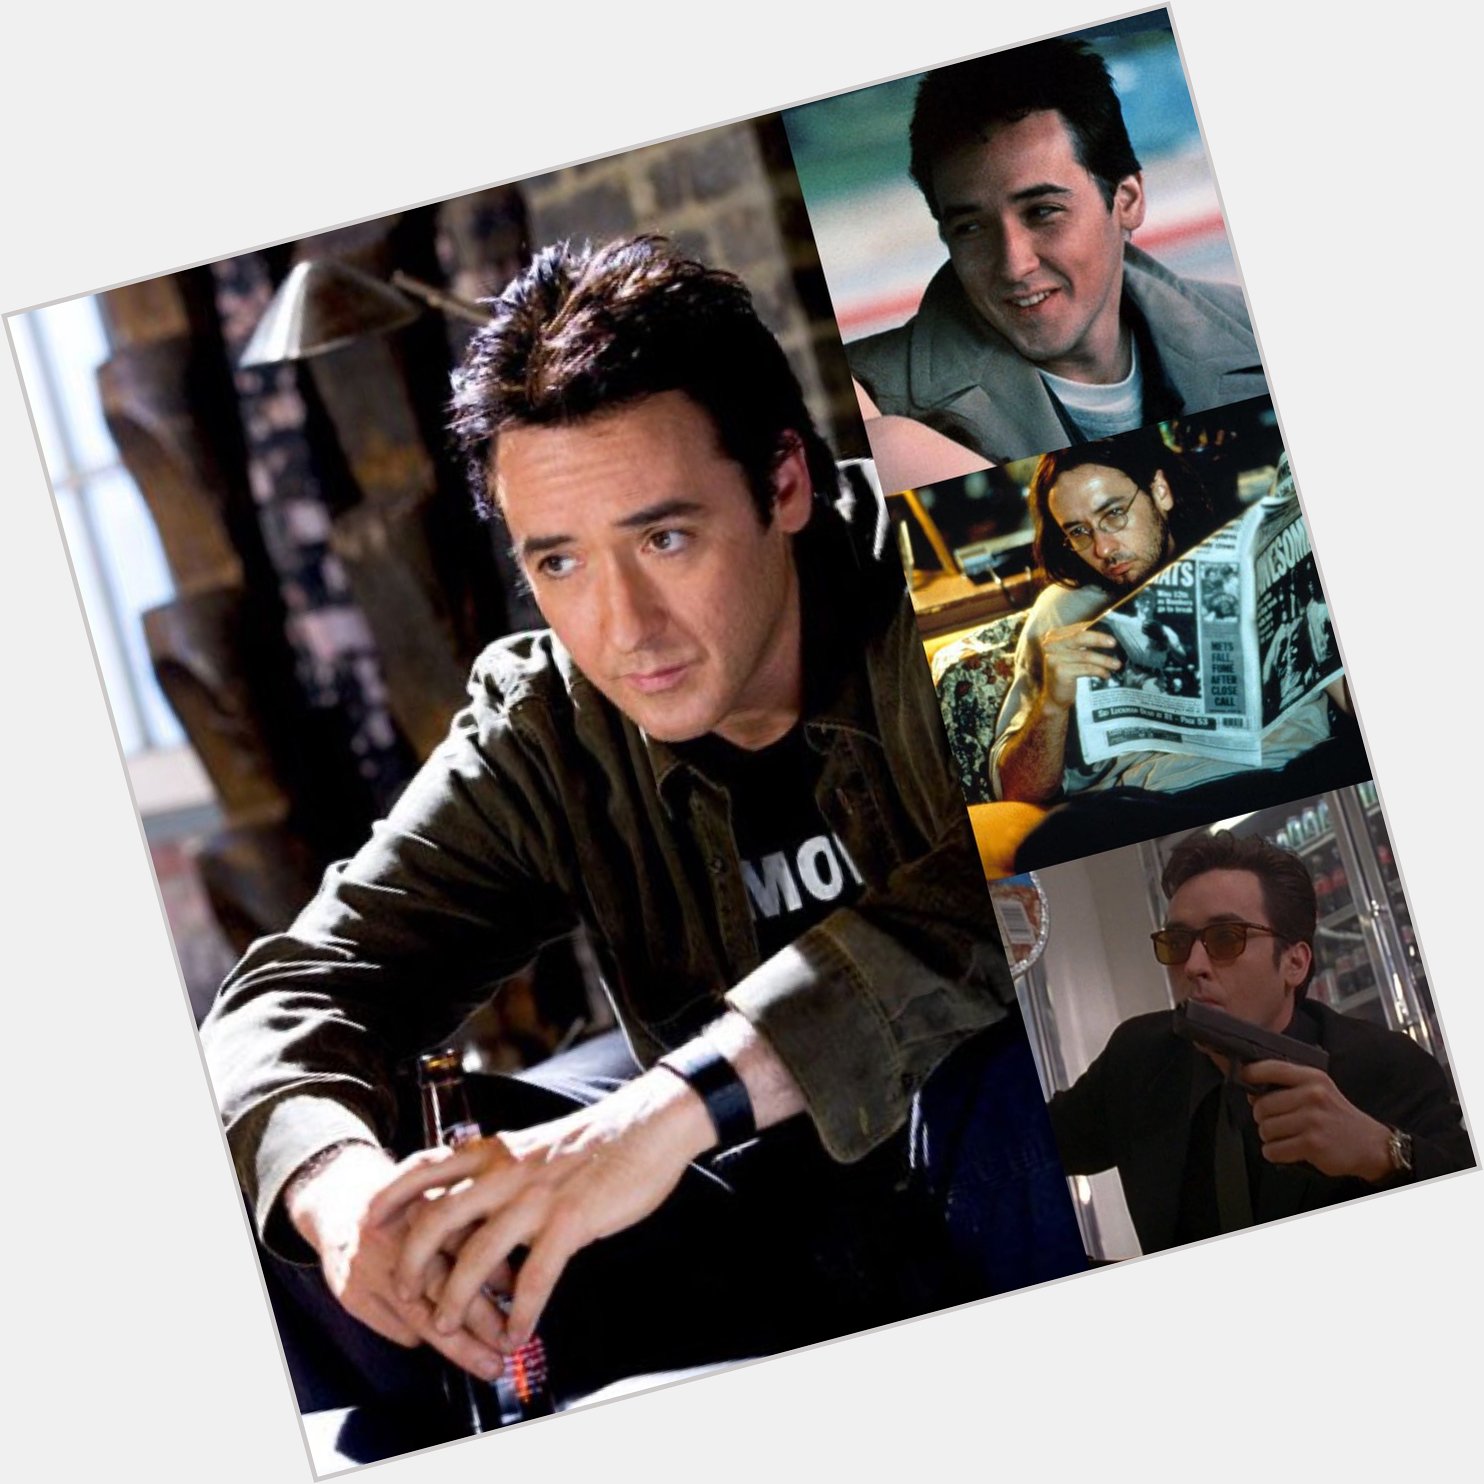 Happy birthday to American actor, producer, screenwriter and activist John Cusack, born June 28, 1966. 